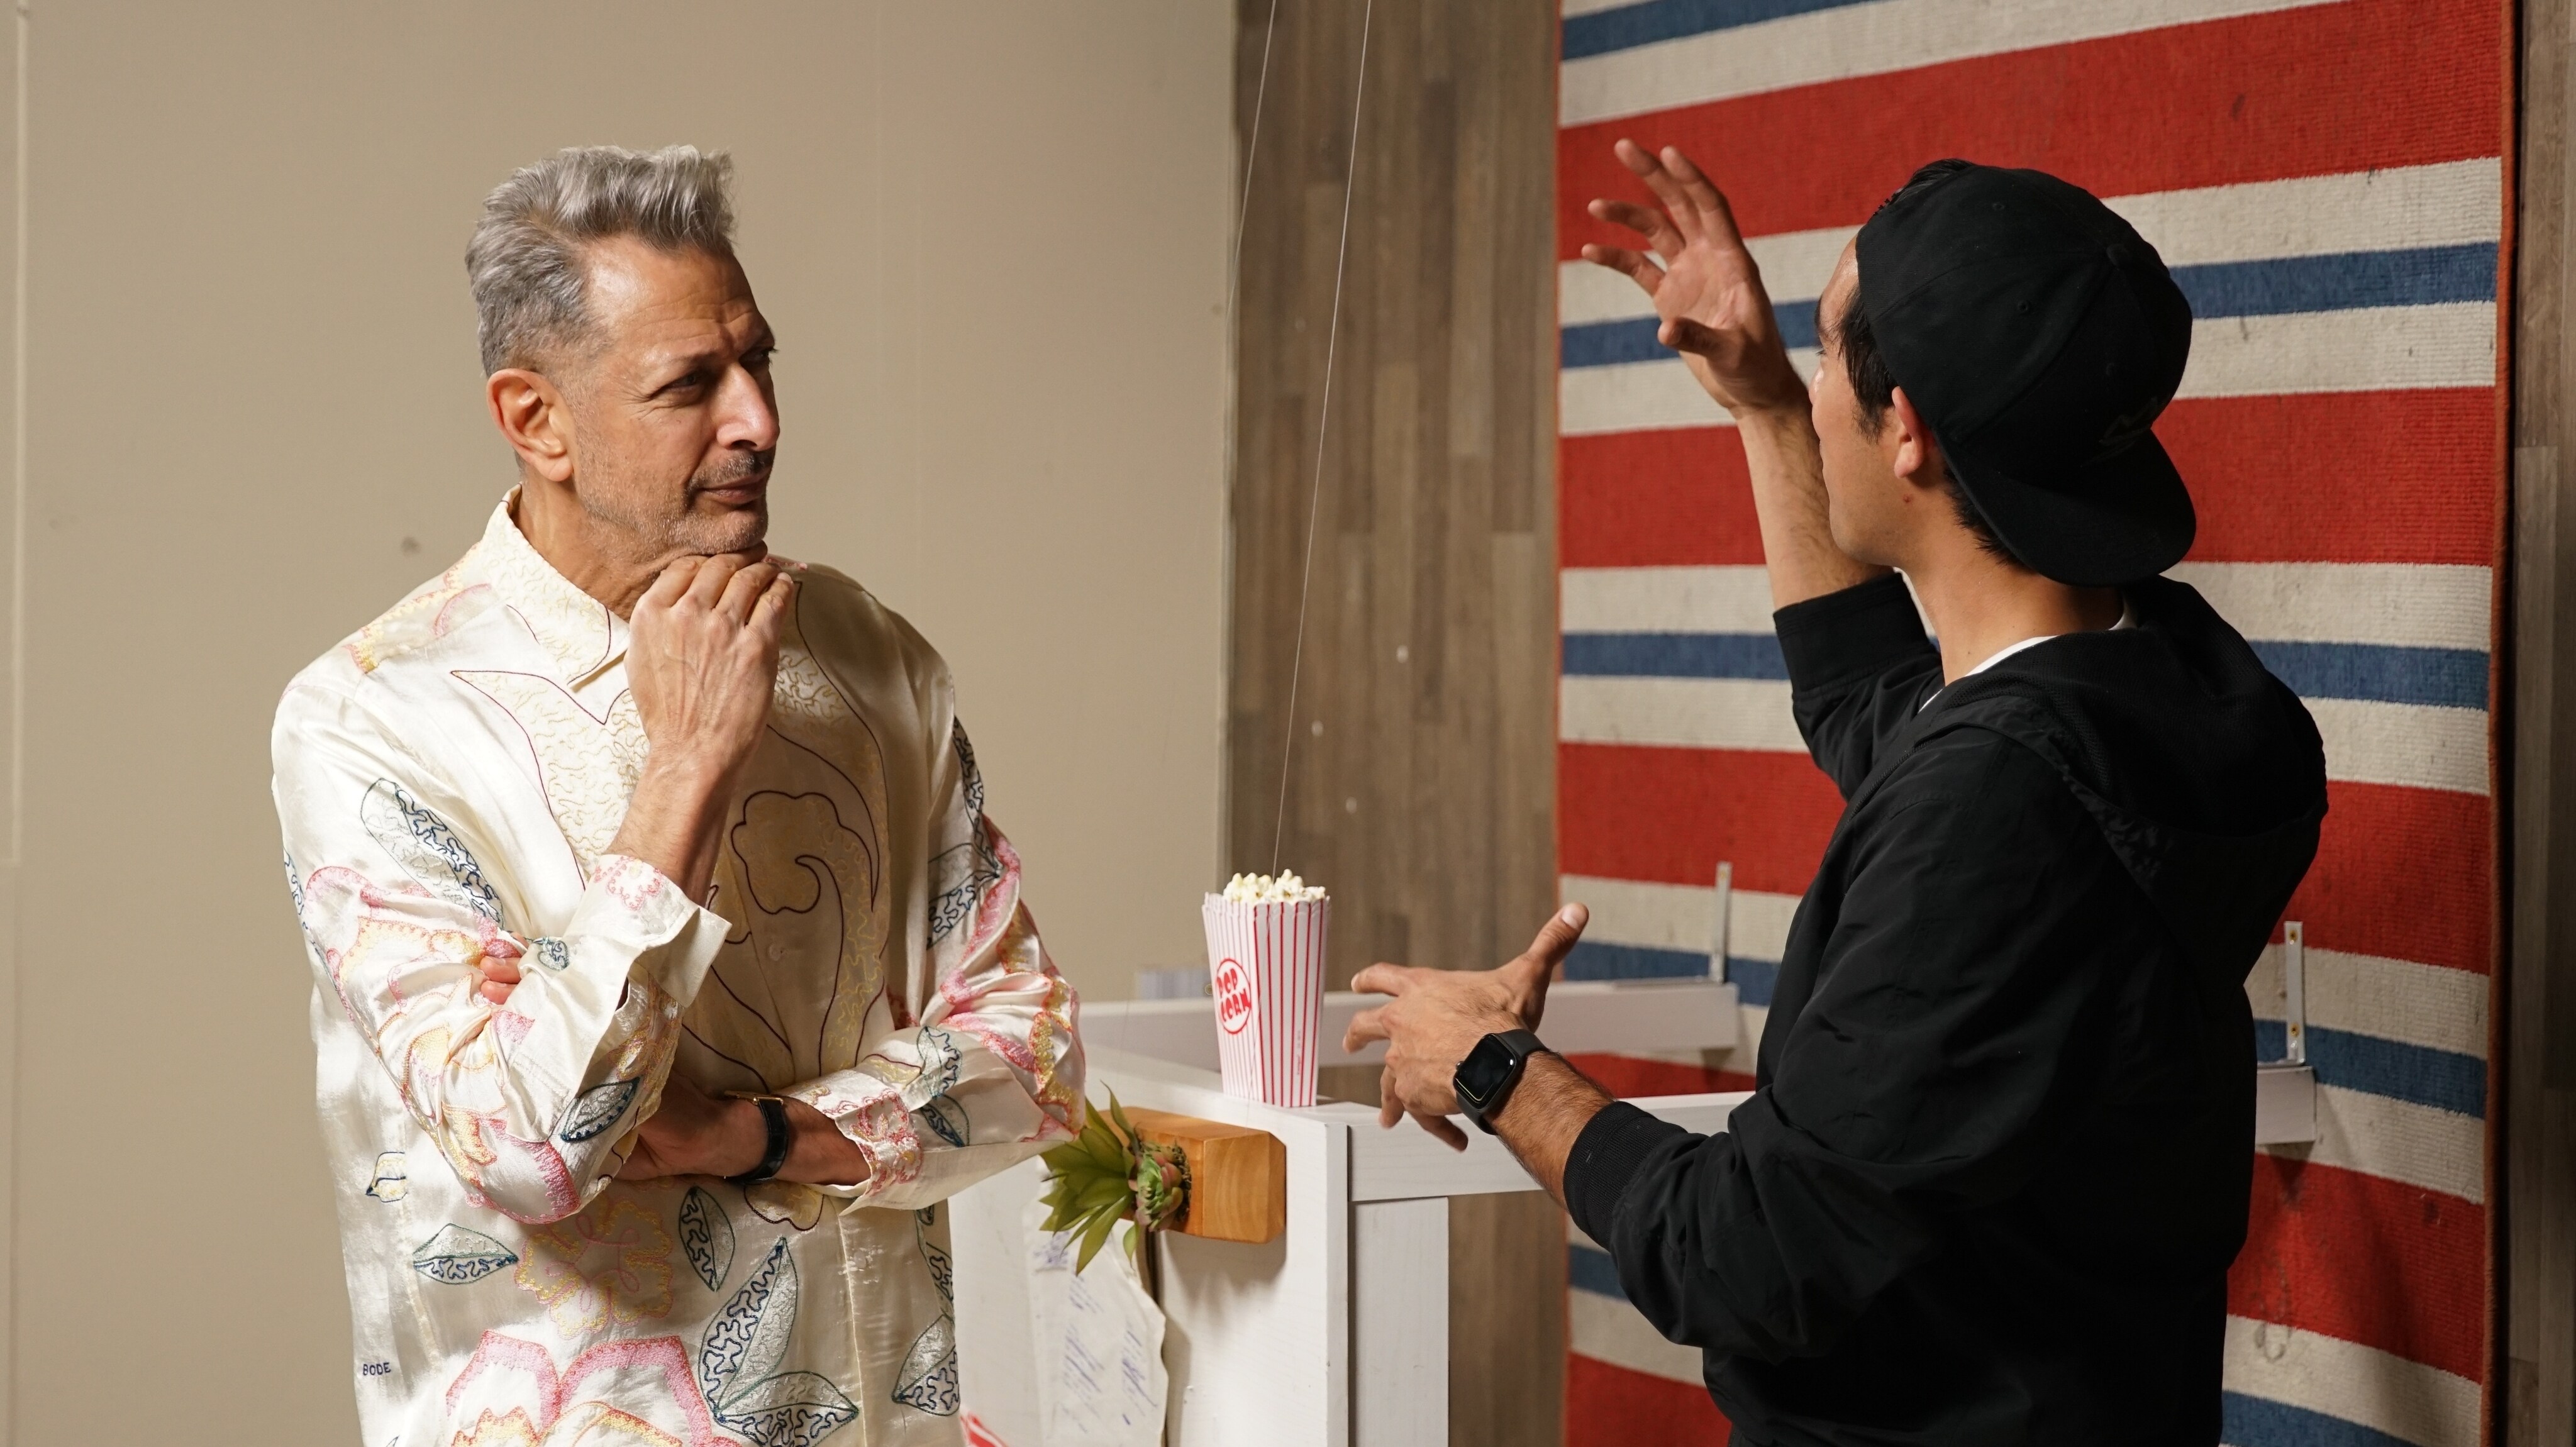 Los Angeles, CA - Jeff Goldblum (L) and Zach King (R) with rug and table on the wall behind them. (Credit: National Geographic)